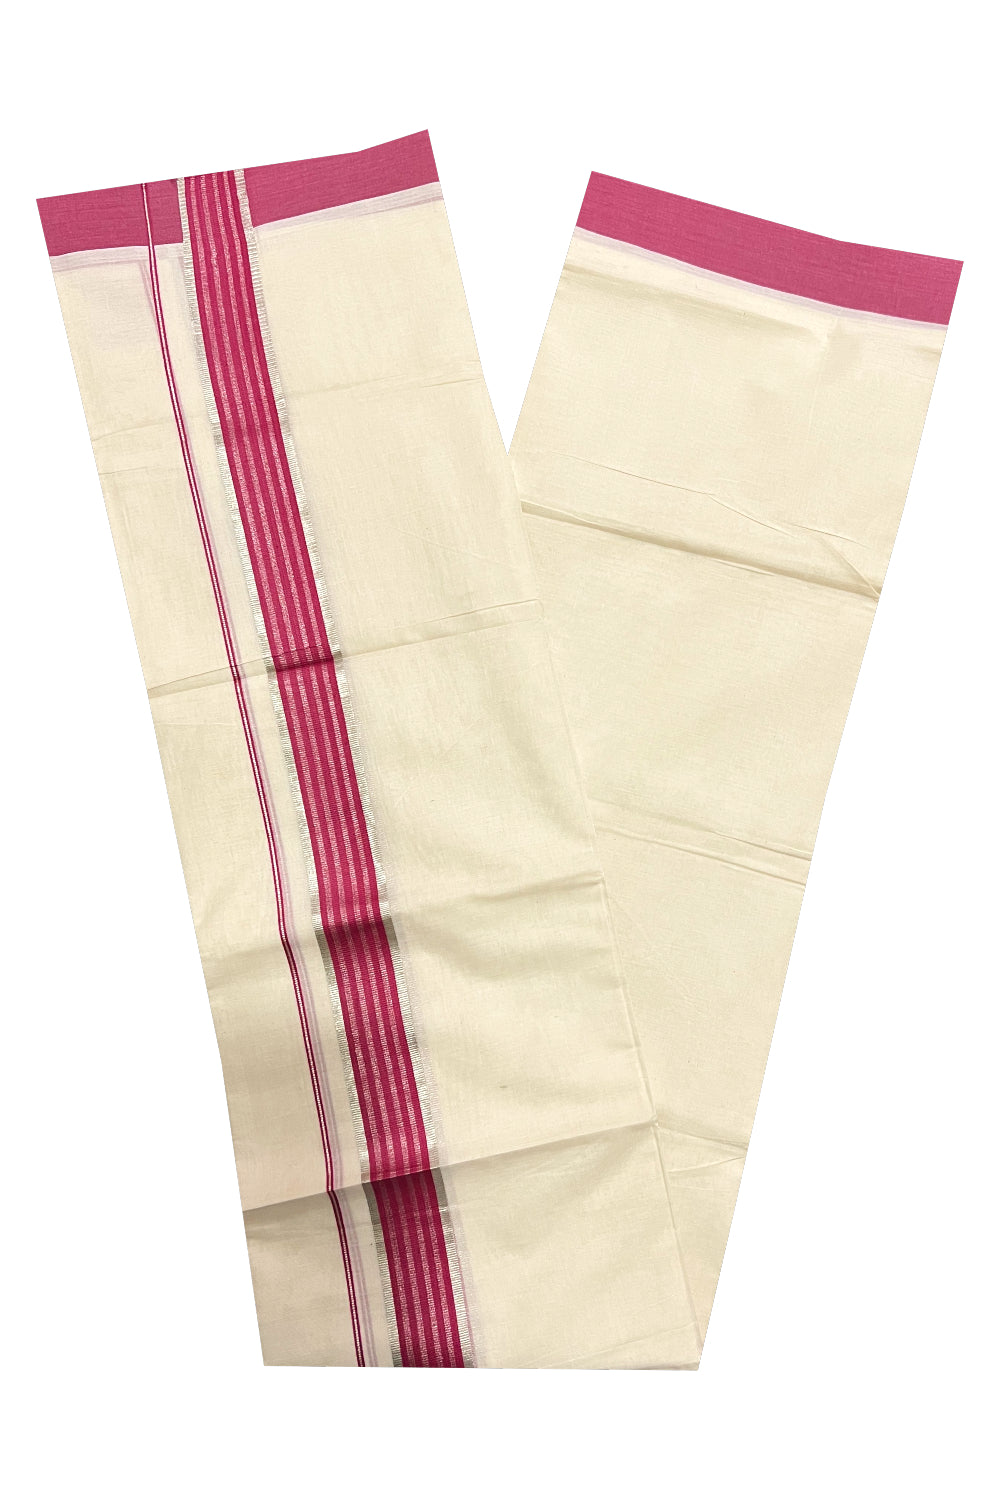 Off White Kerala Double Mundu with Dark Pink and Silver Kasavu Lines Border (South Indian Dhoti)